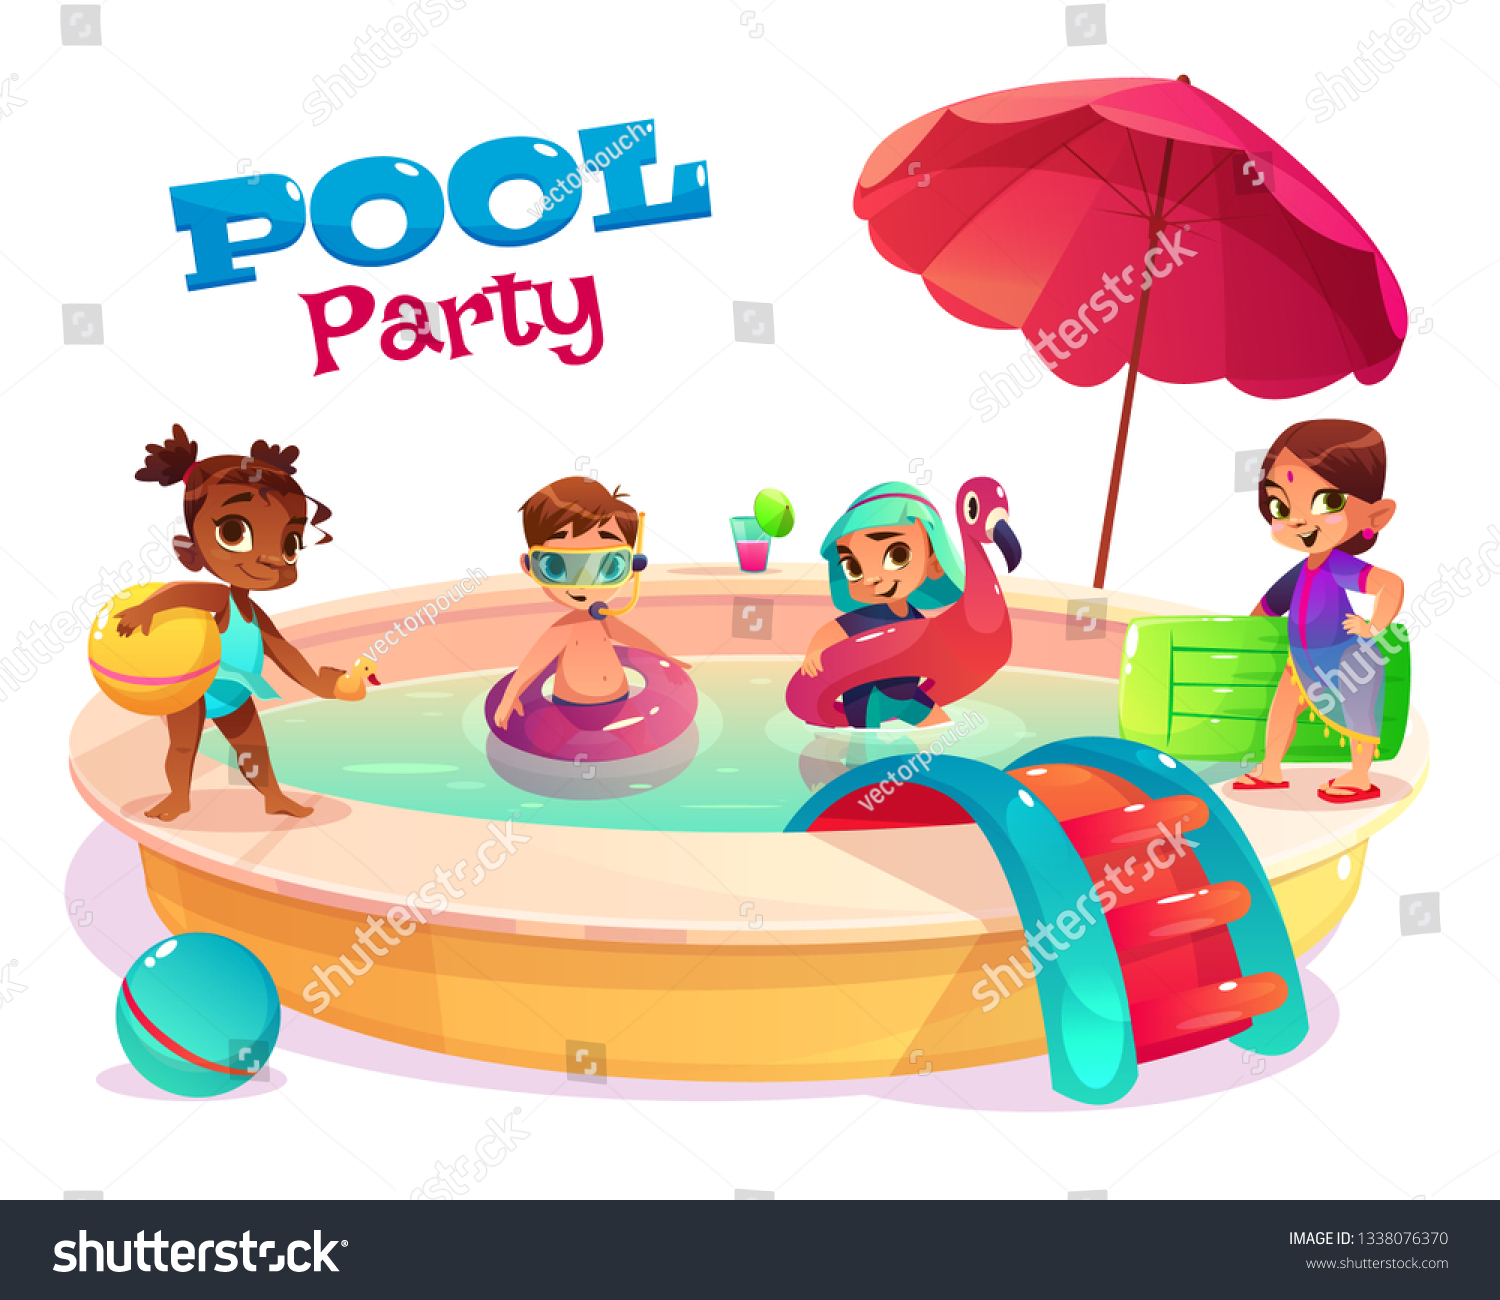 Pool party